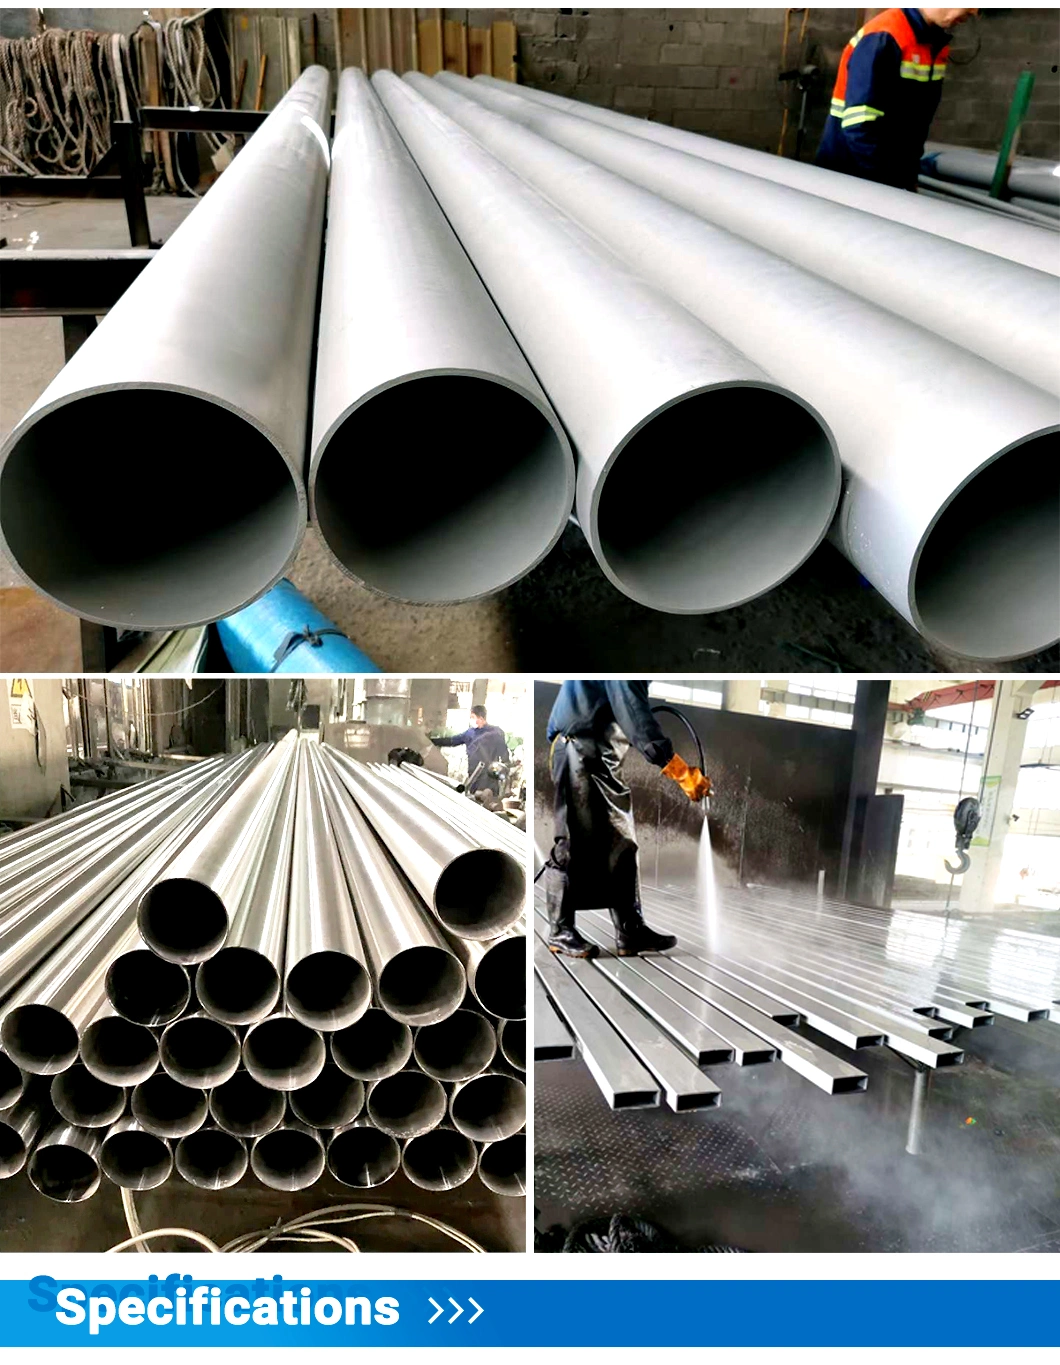 Stainless Steel Pipe/Tube 304 Pipe Stainless Steel Seamless Pipe/Weld Pipe/Tube 316 Pipe